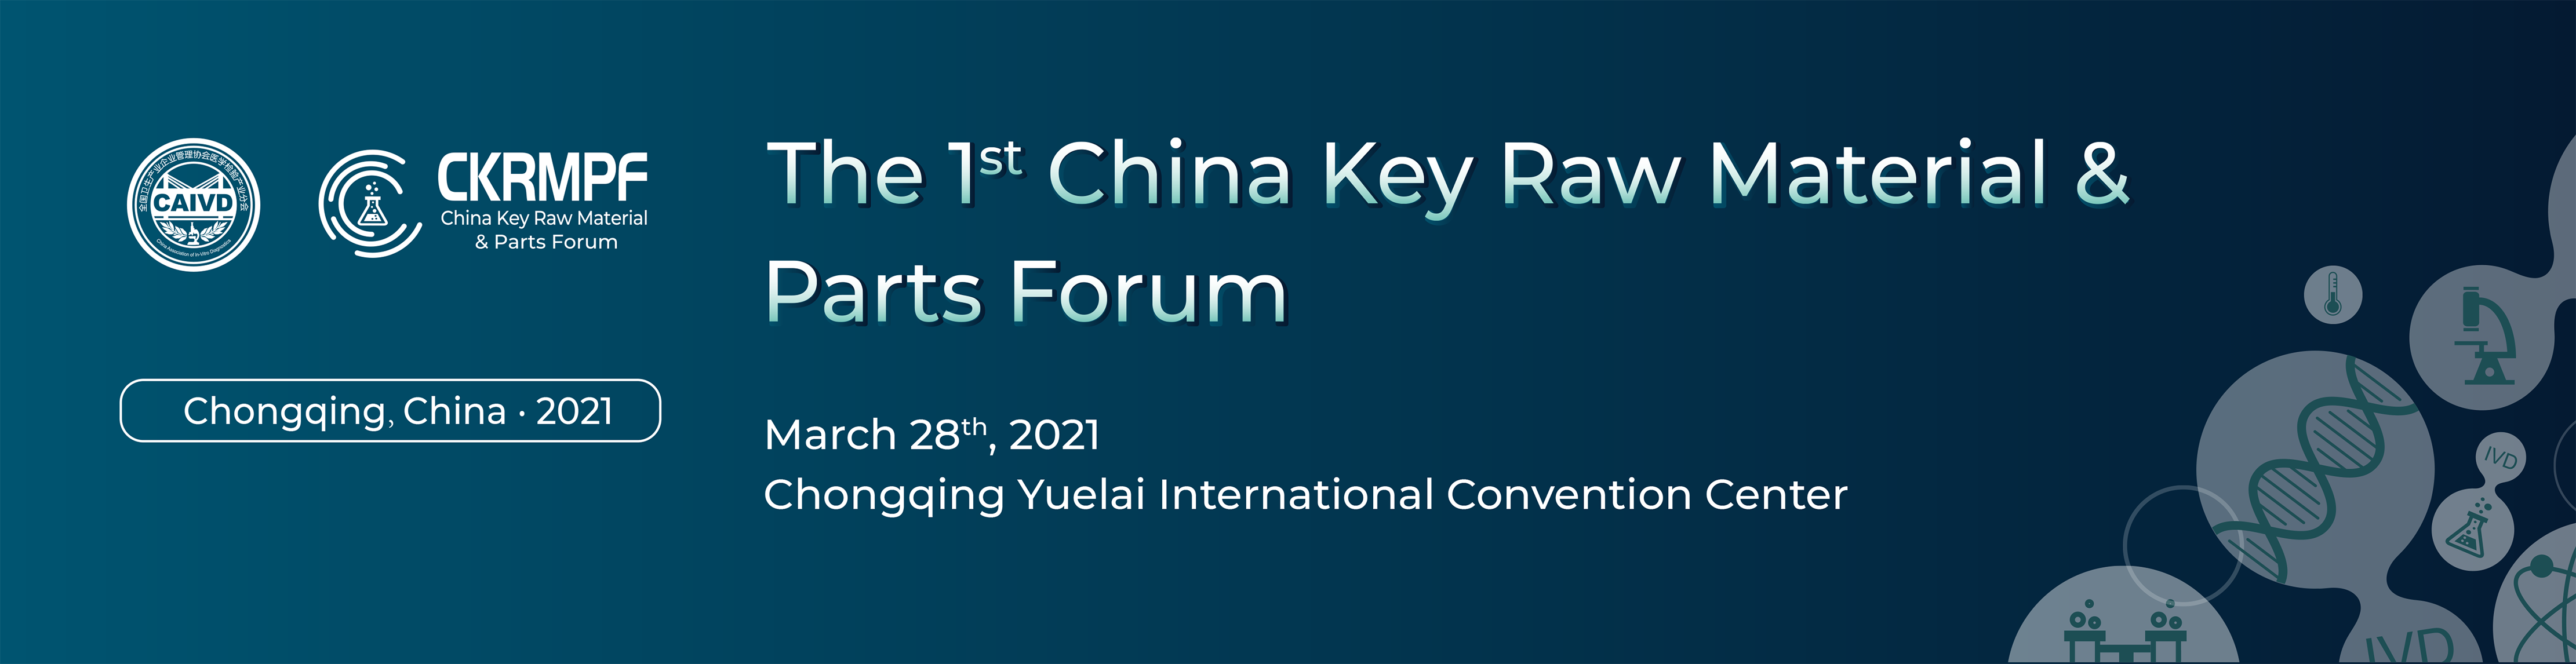 The 1st China Key Raw Material & Parts Forum